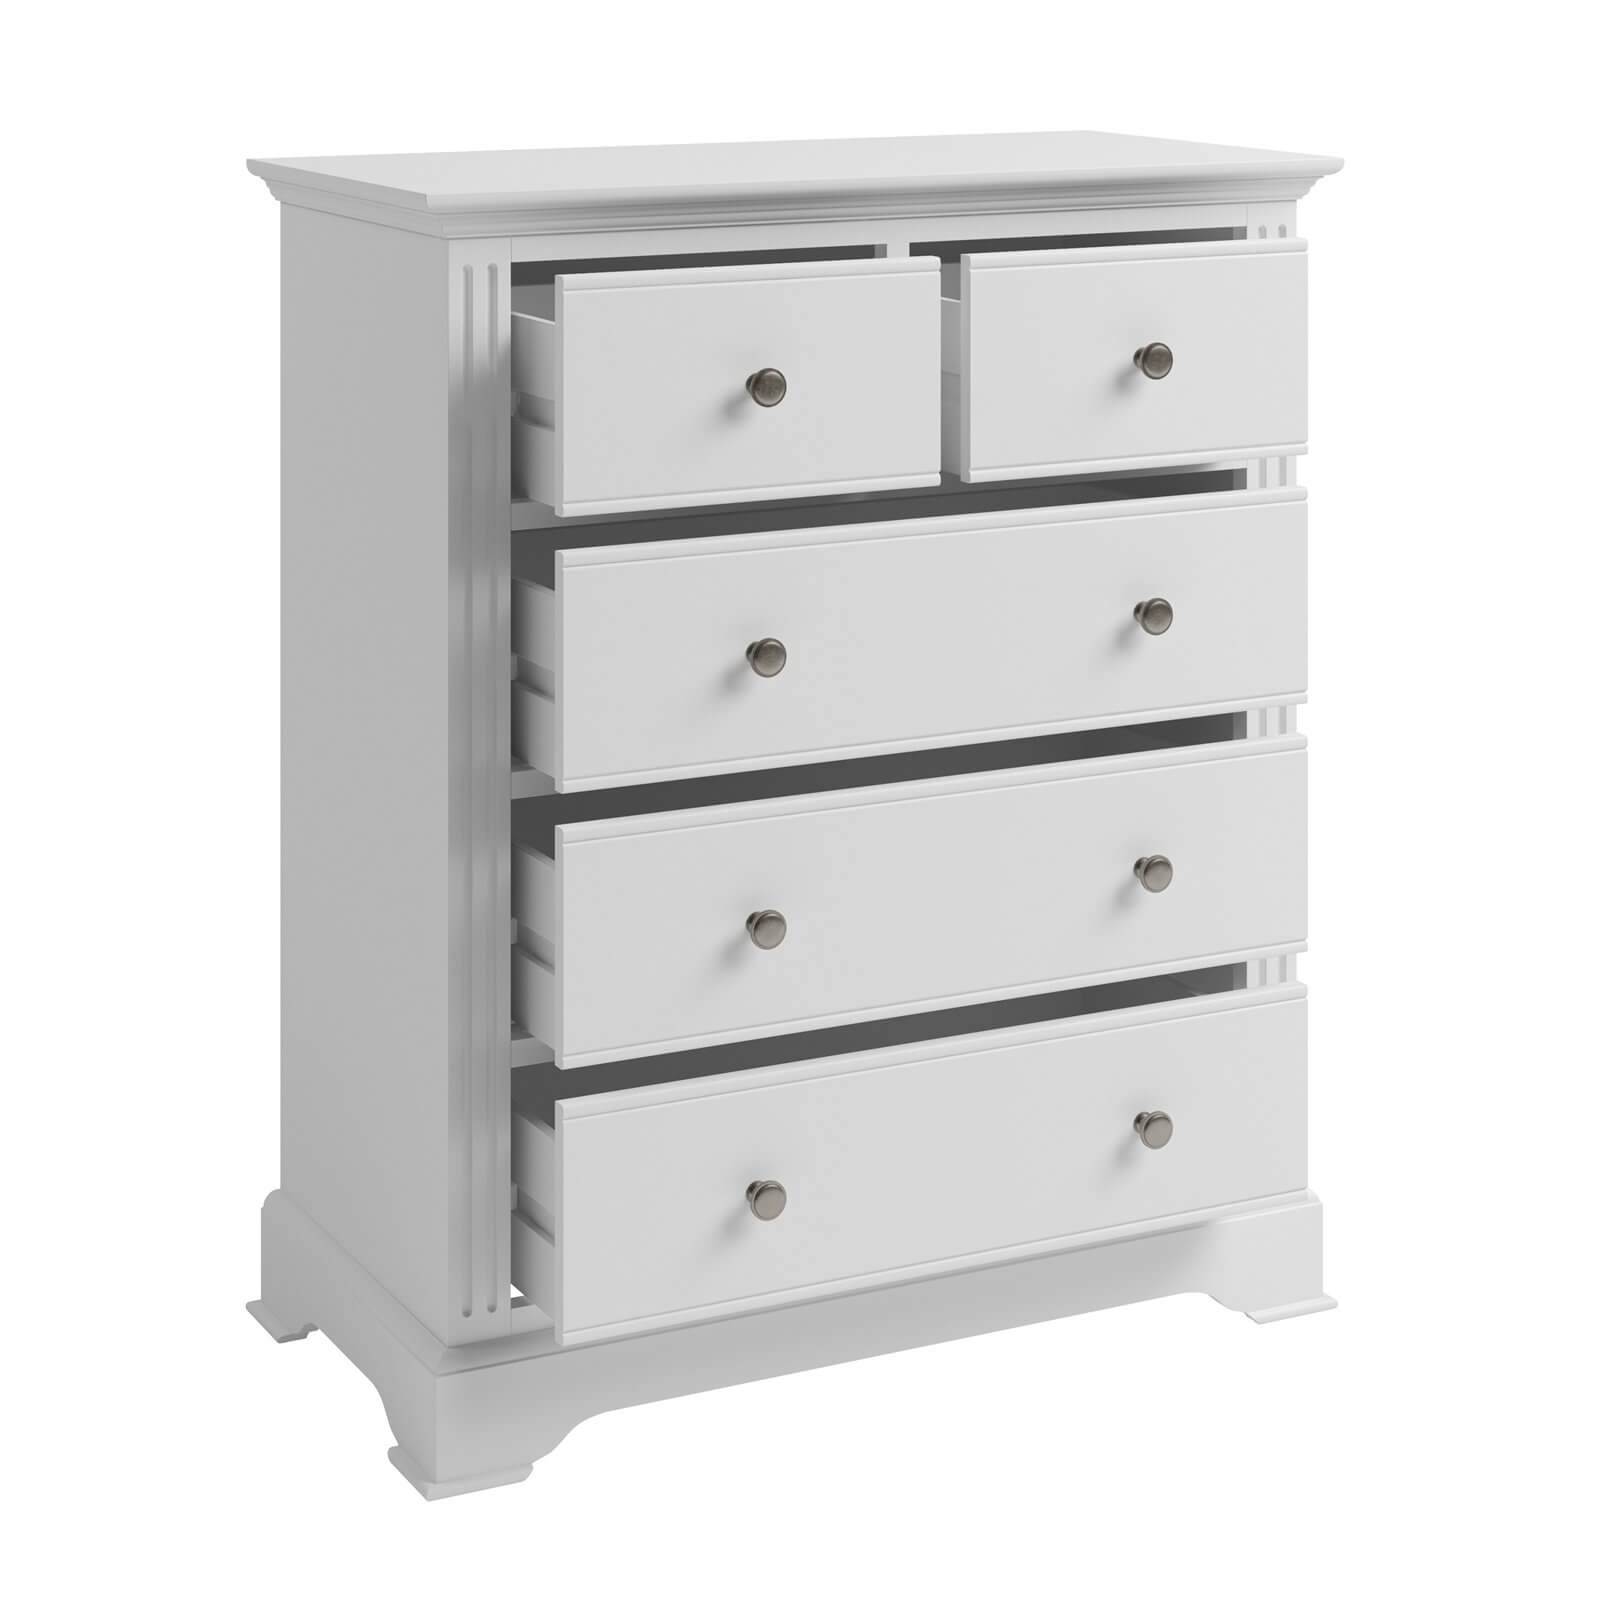 Camborne 2 Over 3 Chest of Drawers - White